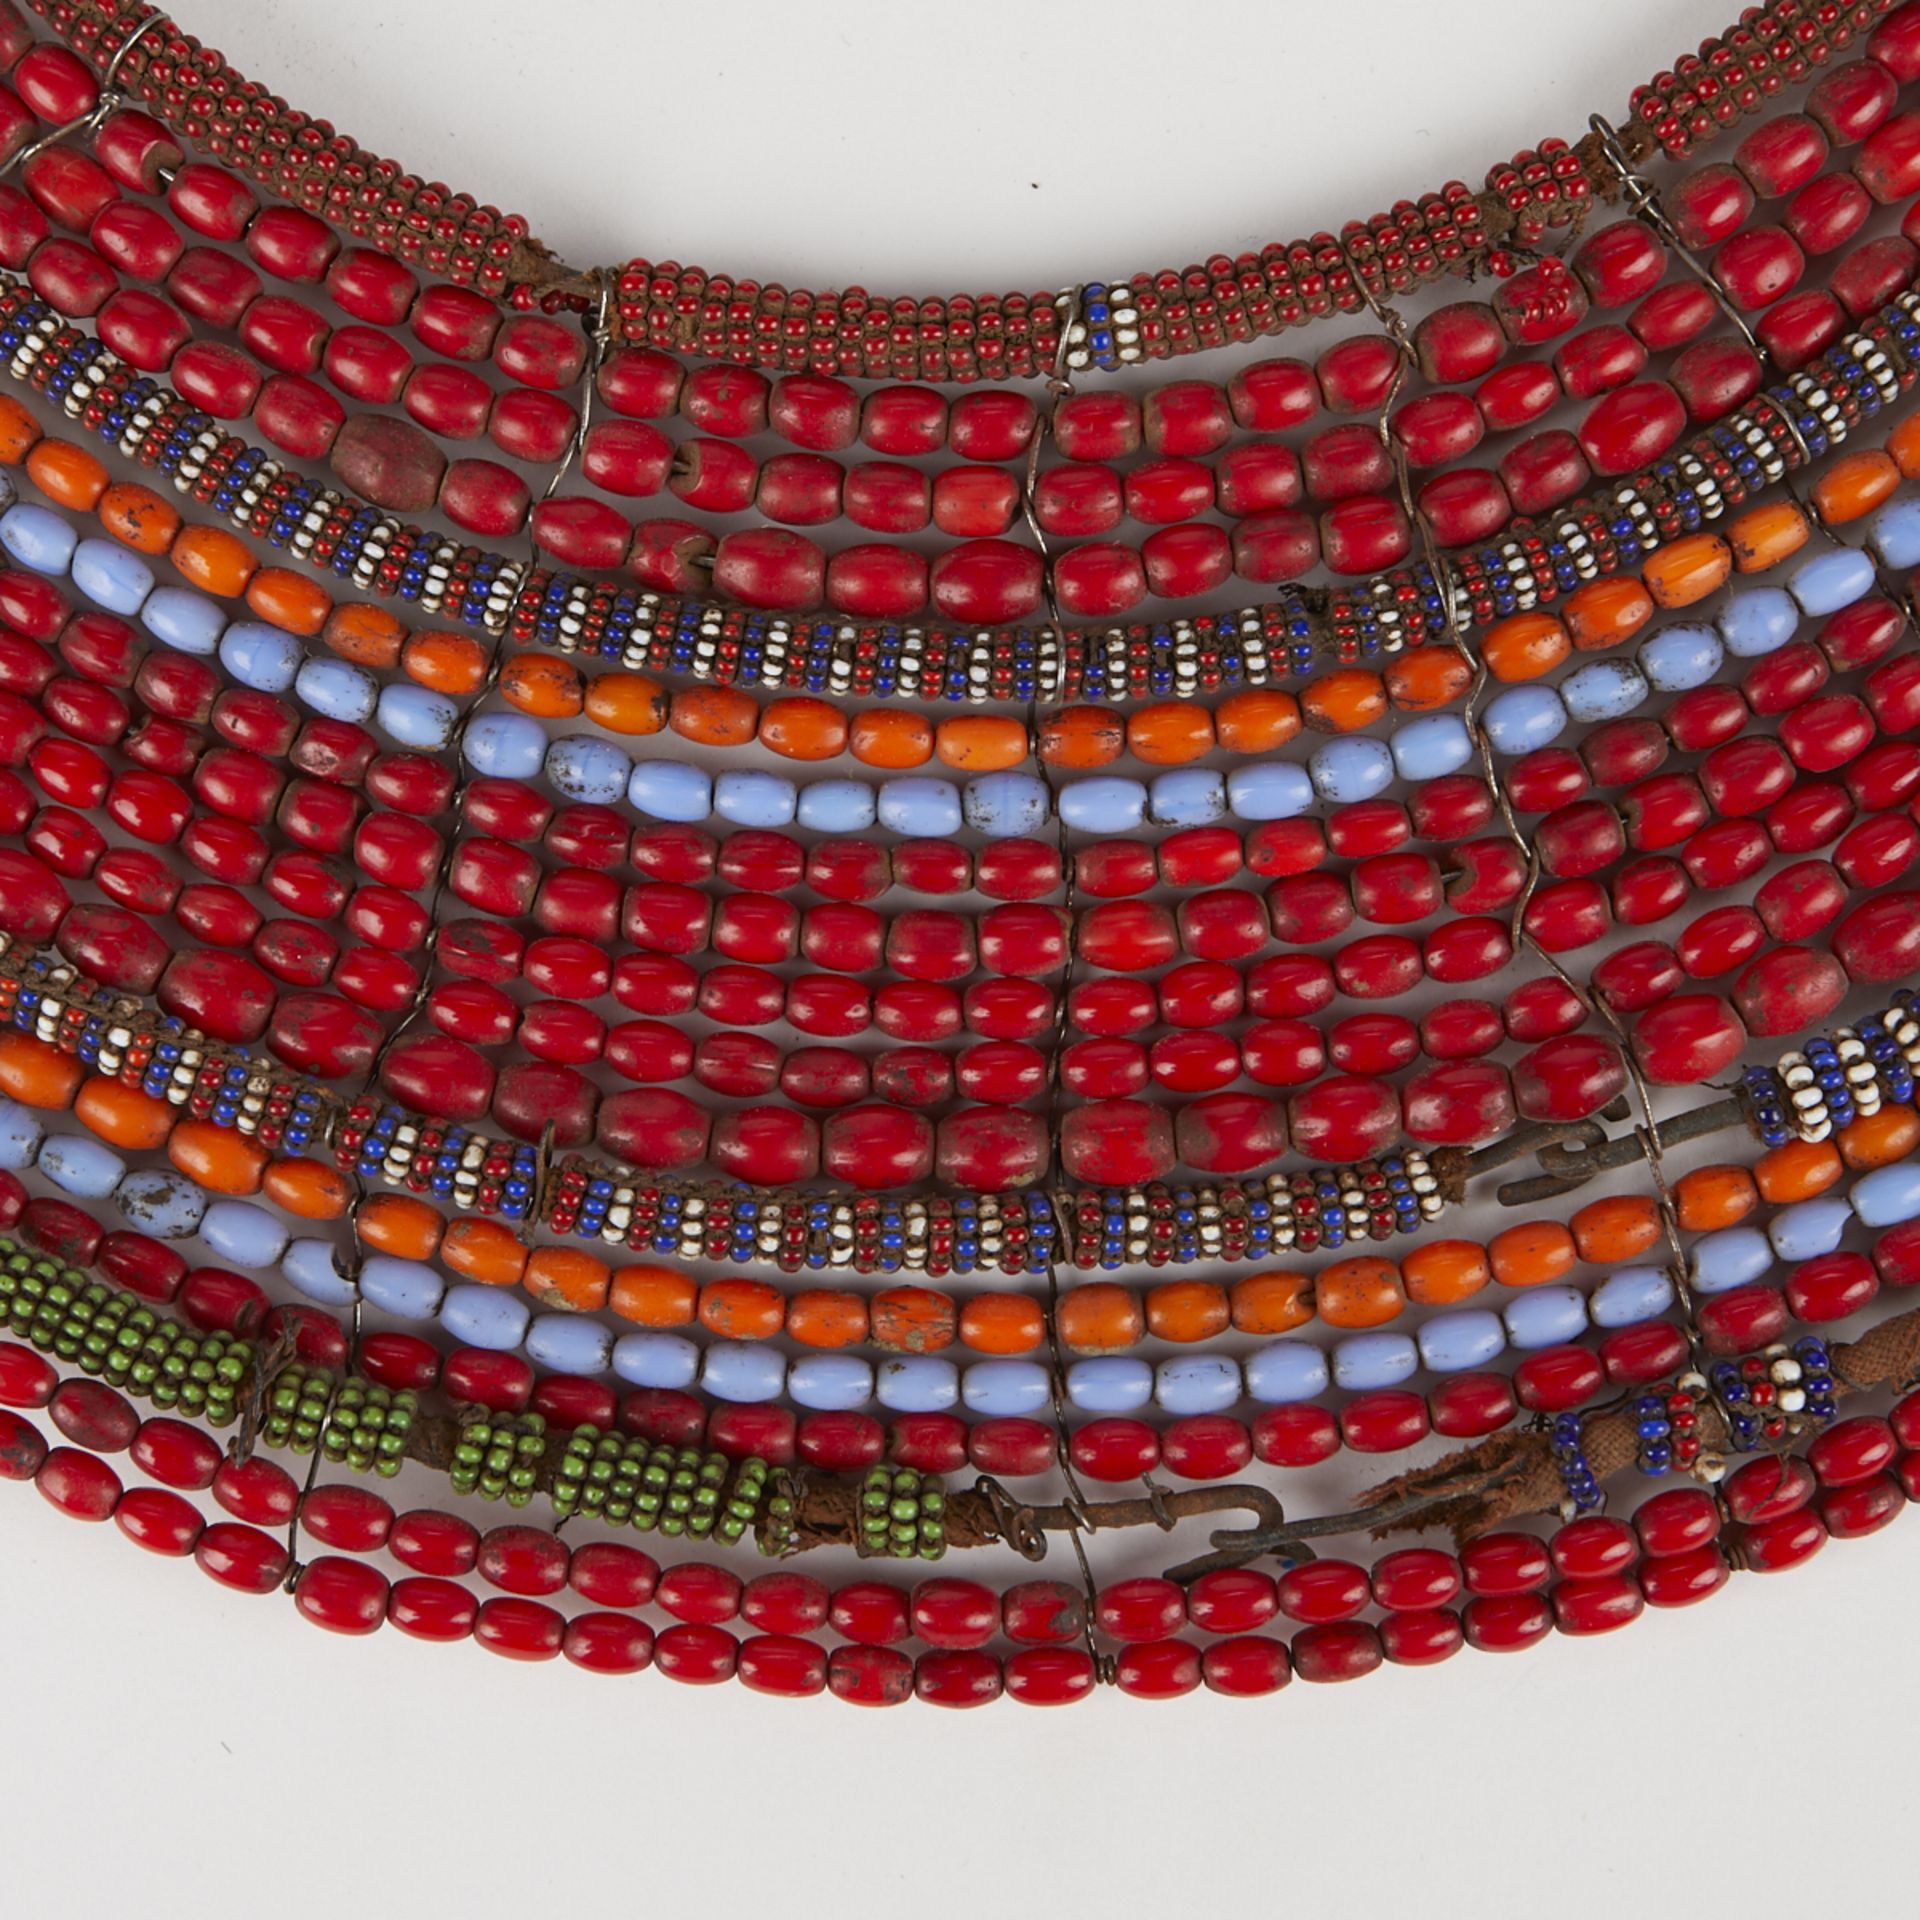 3 Collar Necklaces - 2 African and 1 New Guinea - Image 9 of 10